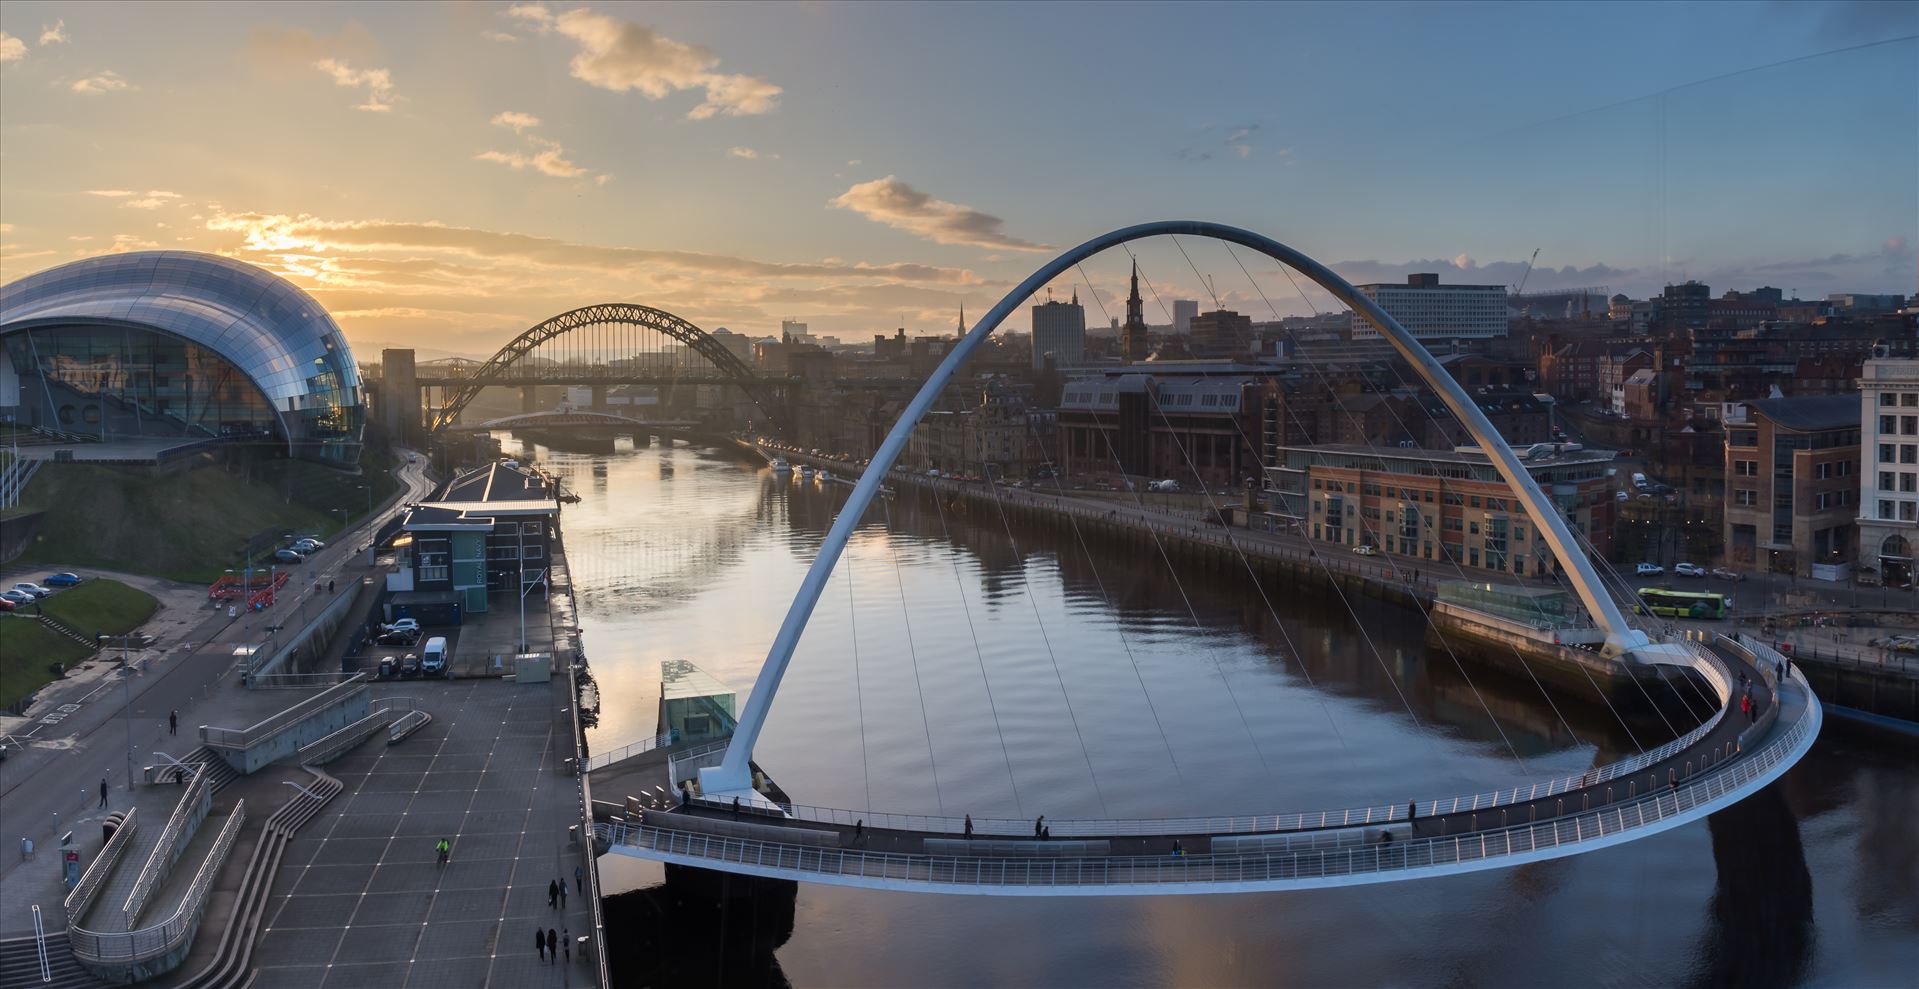 Gateshead & Newcastle quaysides at sunset Taken from the viewing platform on level 4 of the Baltic arts building. This photo is made from 3 separate images stitched together to make this panoramic shot. by philreay